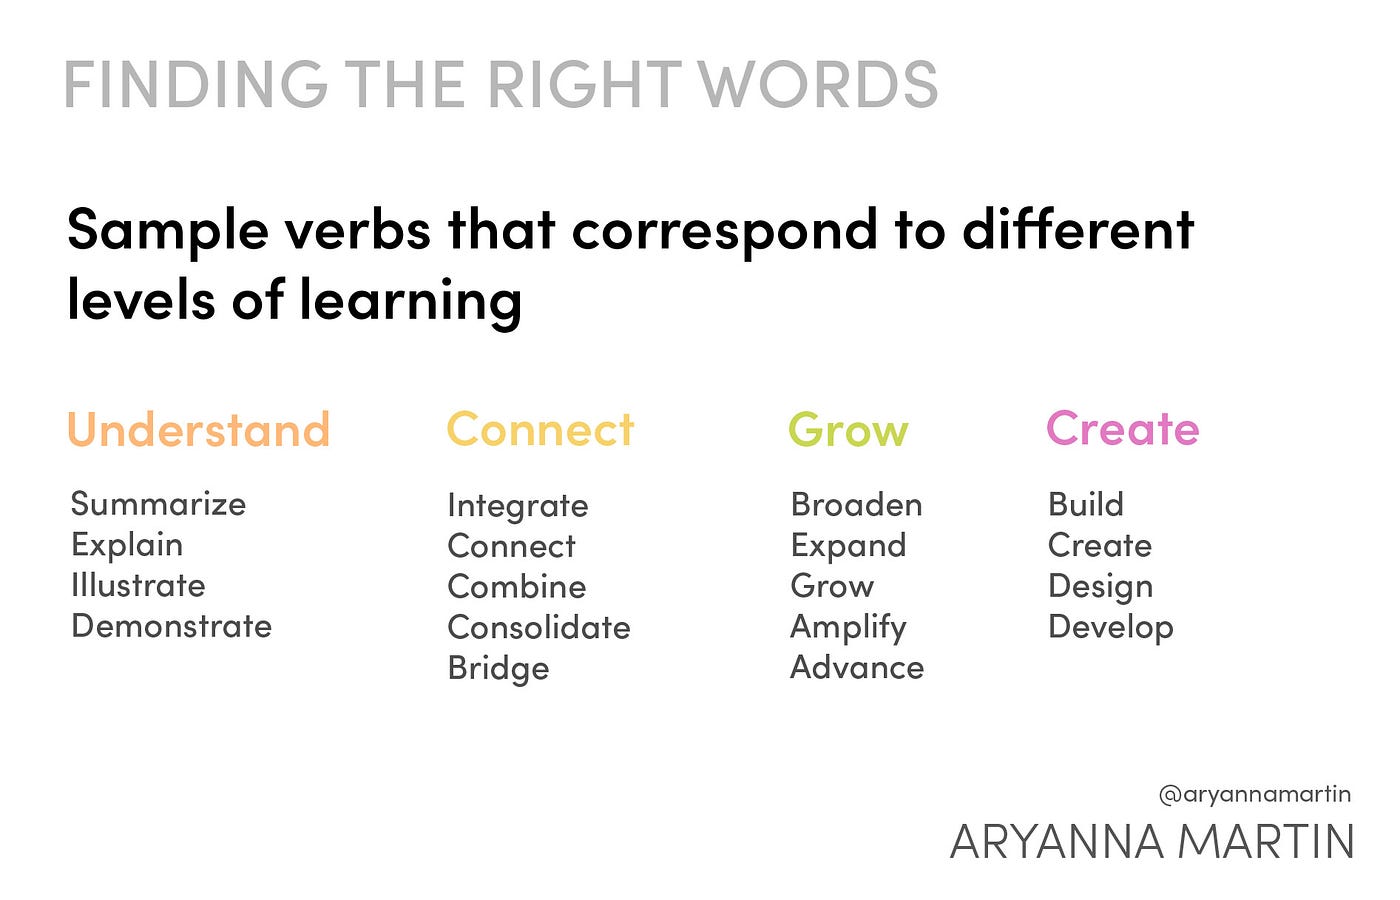 Sample verbs that correspond to different levels of learning